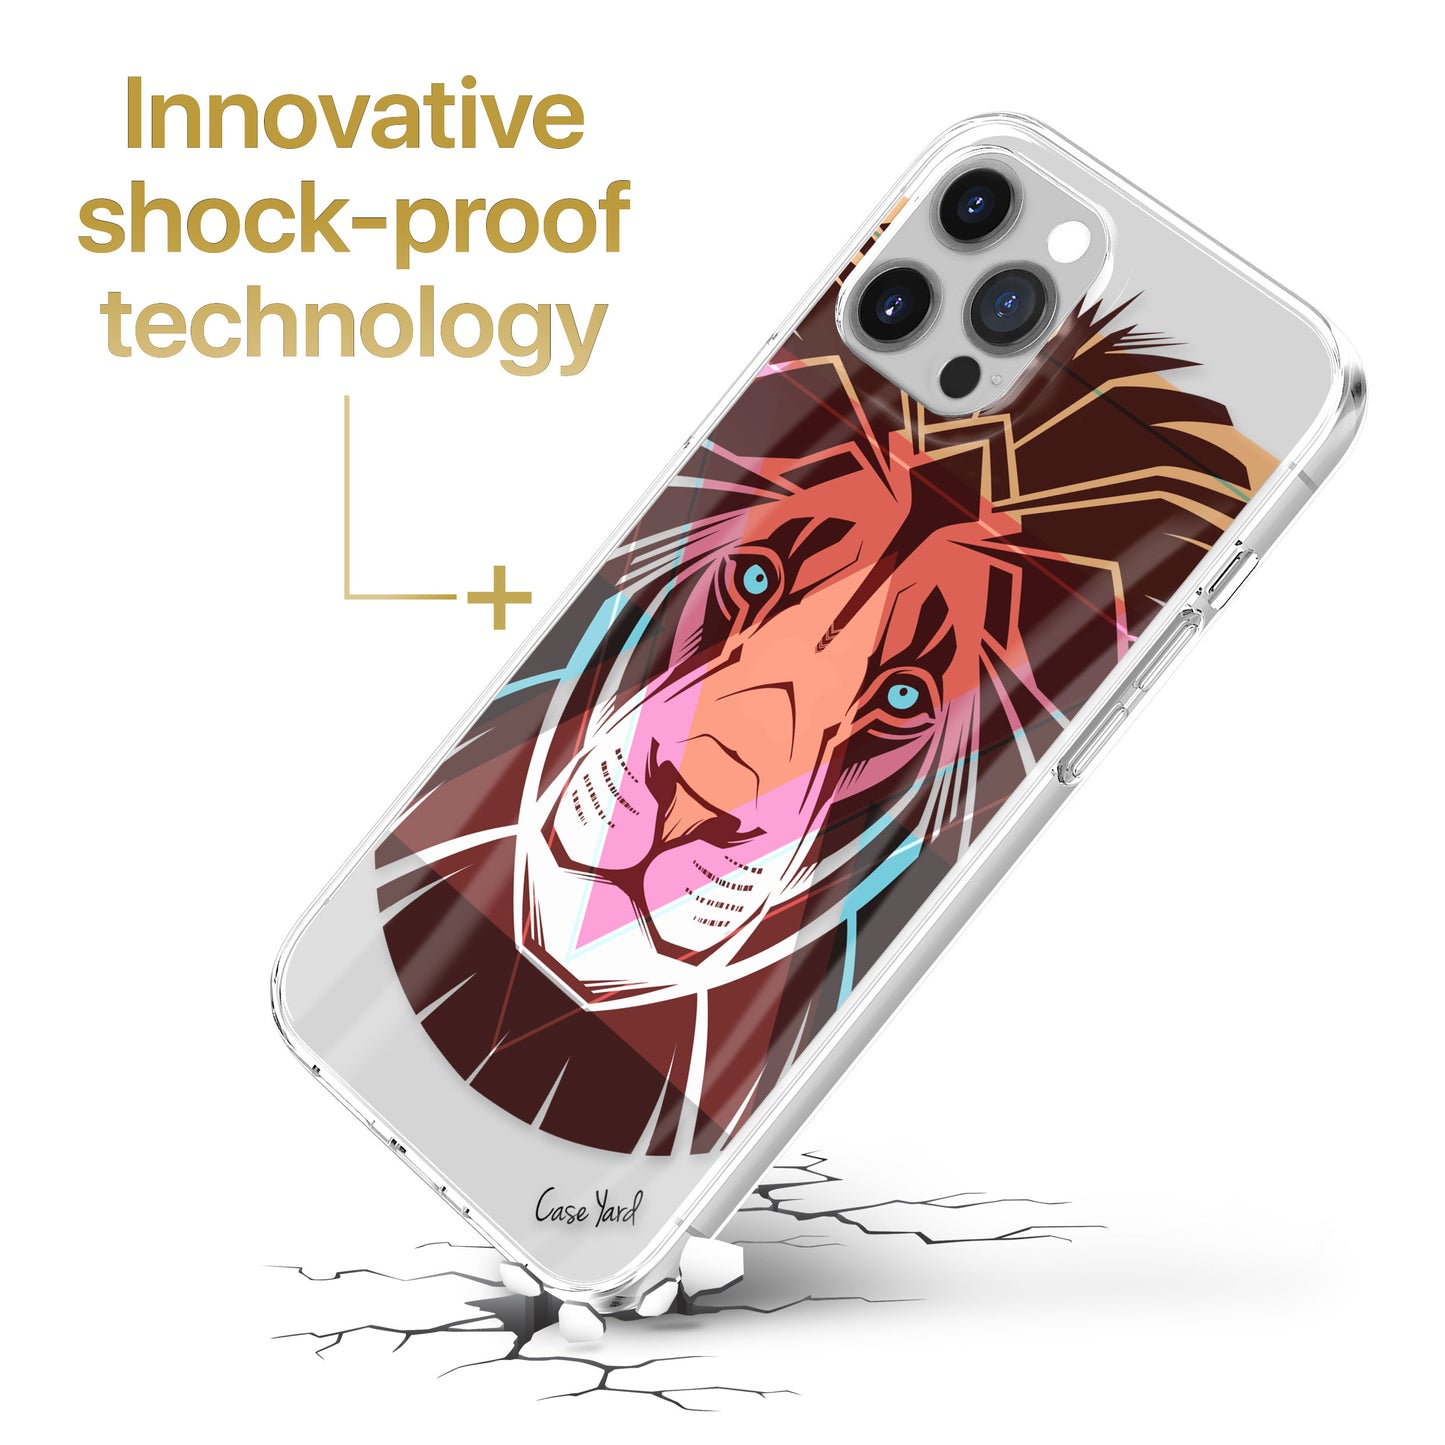 TPU Case Clear case with (Lion Tribal) Design for iPhone & Samsung Phones